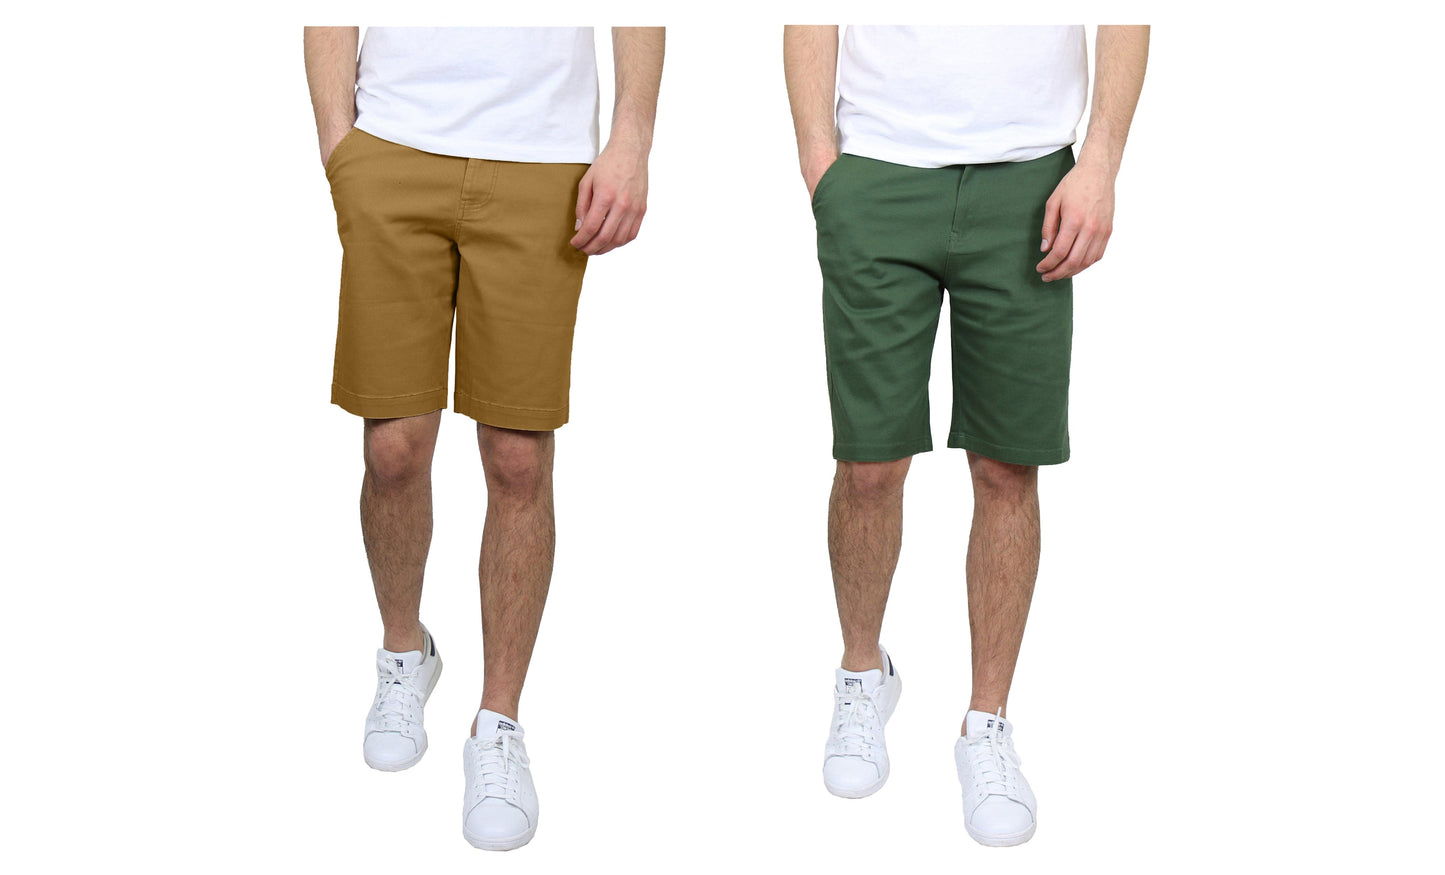 Men's 2-Pack Flat-Front Slim Fit Cotton Stretch Chino Shorts (Sizes, 30-42)